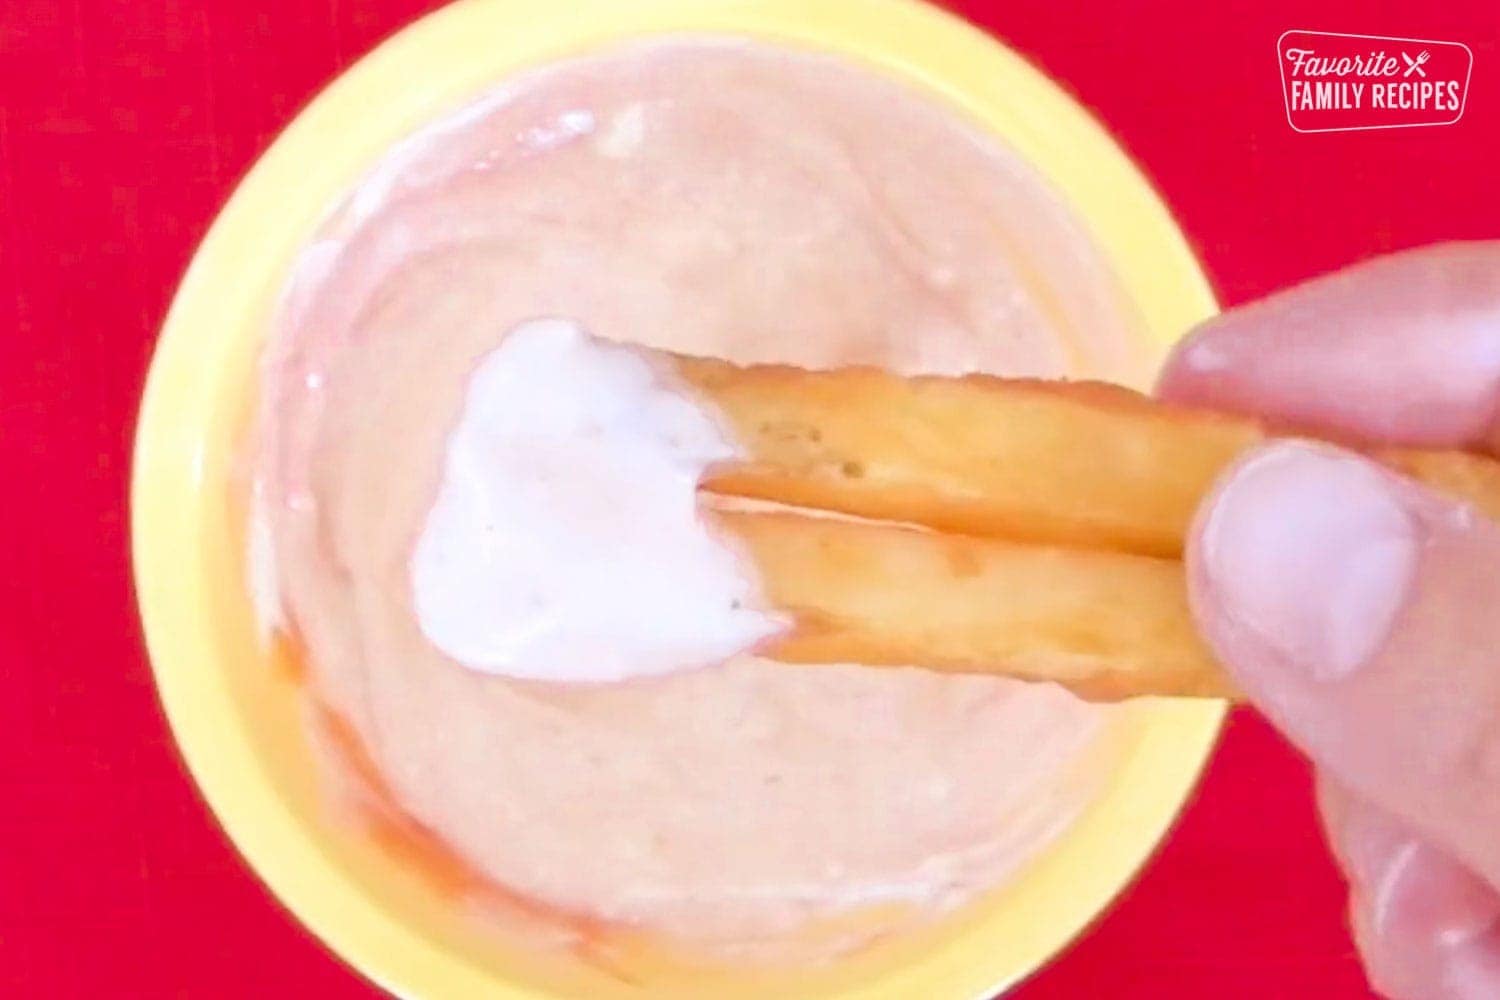 Fry Sauce on French Fries